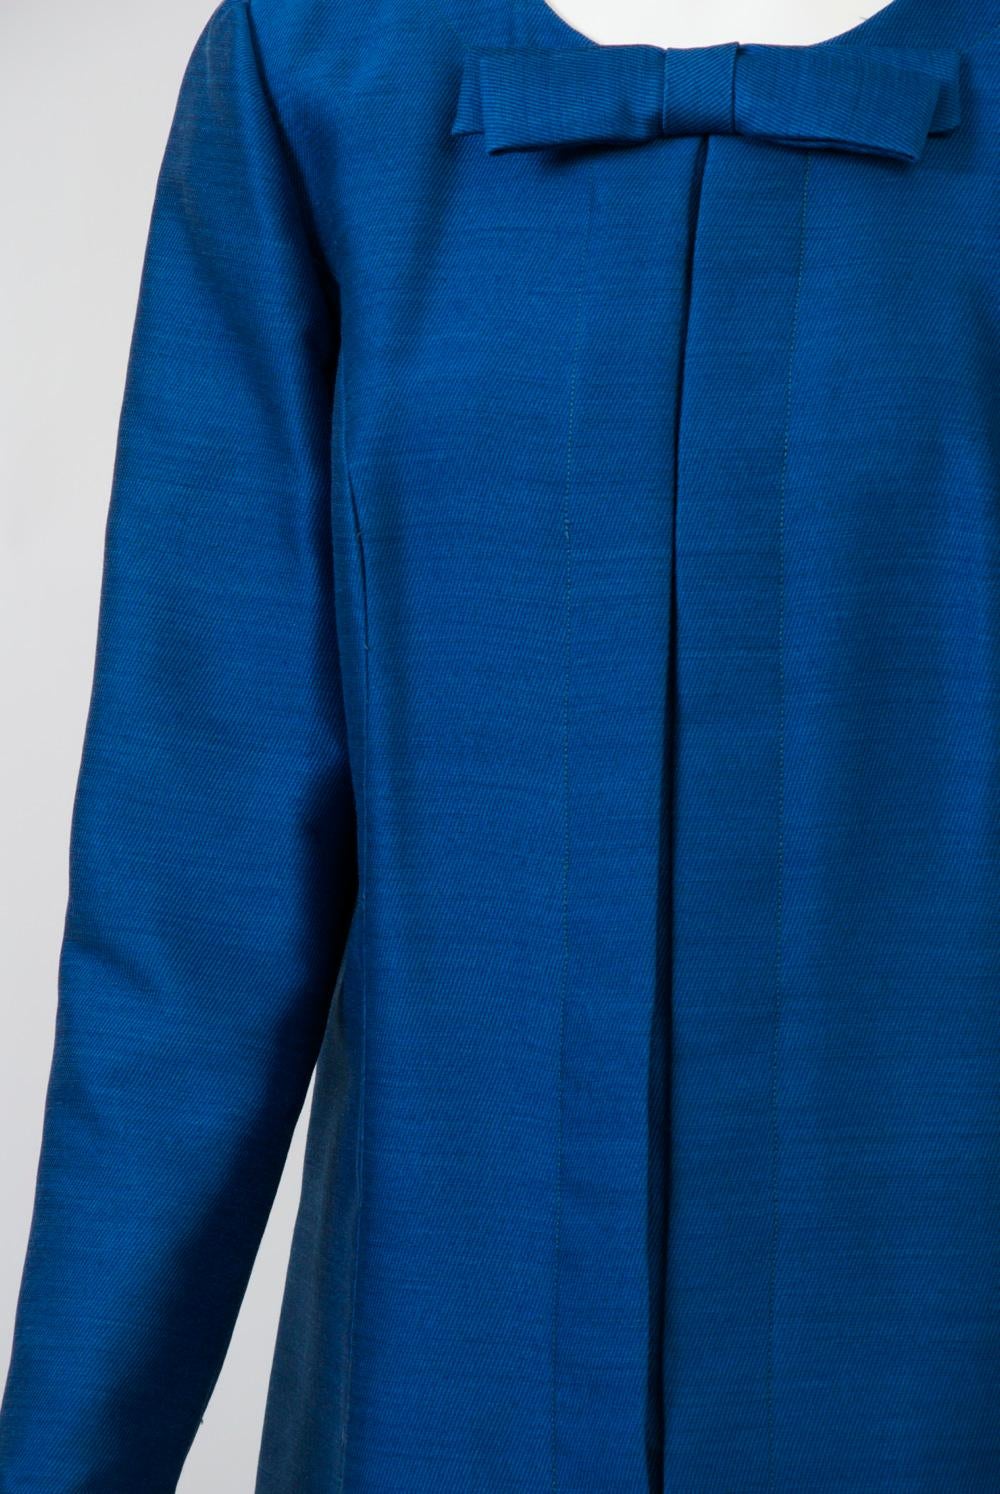 Coat-style dress of royal blue silk twill by Arnold Scaasi for the manufacturer Martini. Straight style featuring a center pleat that conceals zipper opening, low side pockets, and a fixed bow at the center of the round neckline. Long, set-in